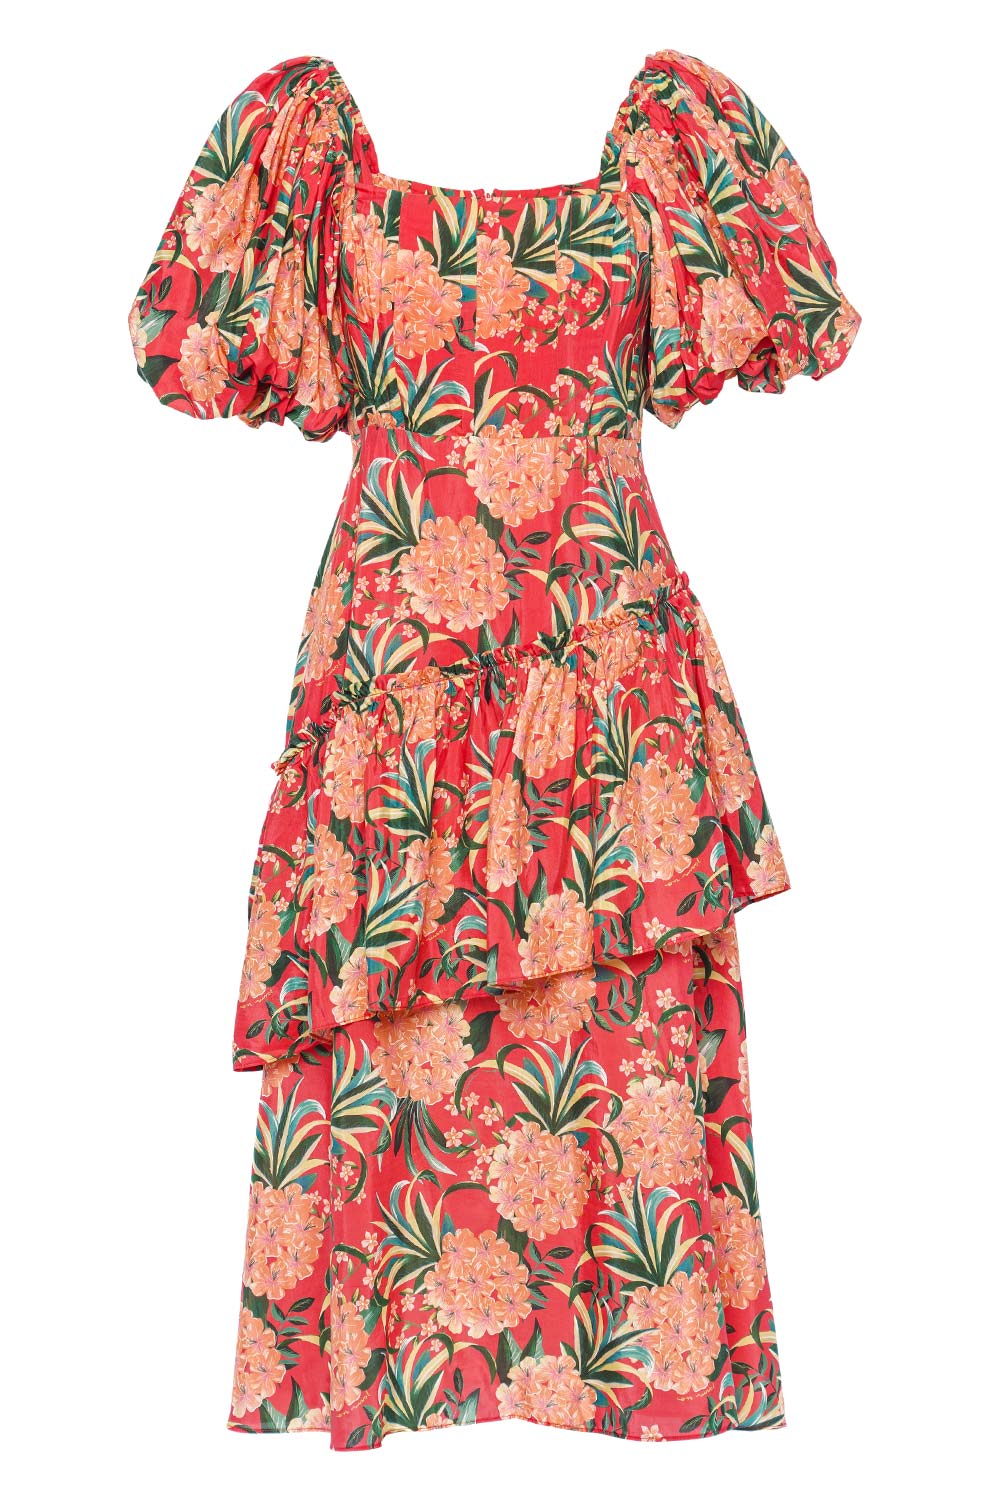 FARM Rio PINEAPPLE BLOOM RED CUT OUT MIDI DRESS 315368 PINEAPPLE BLOOM RED